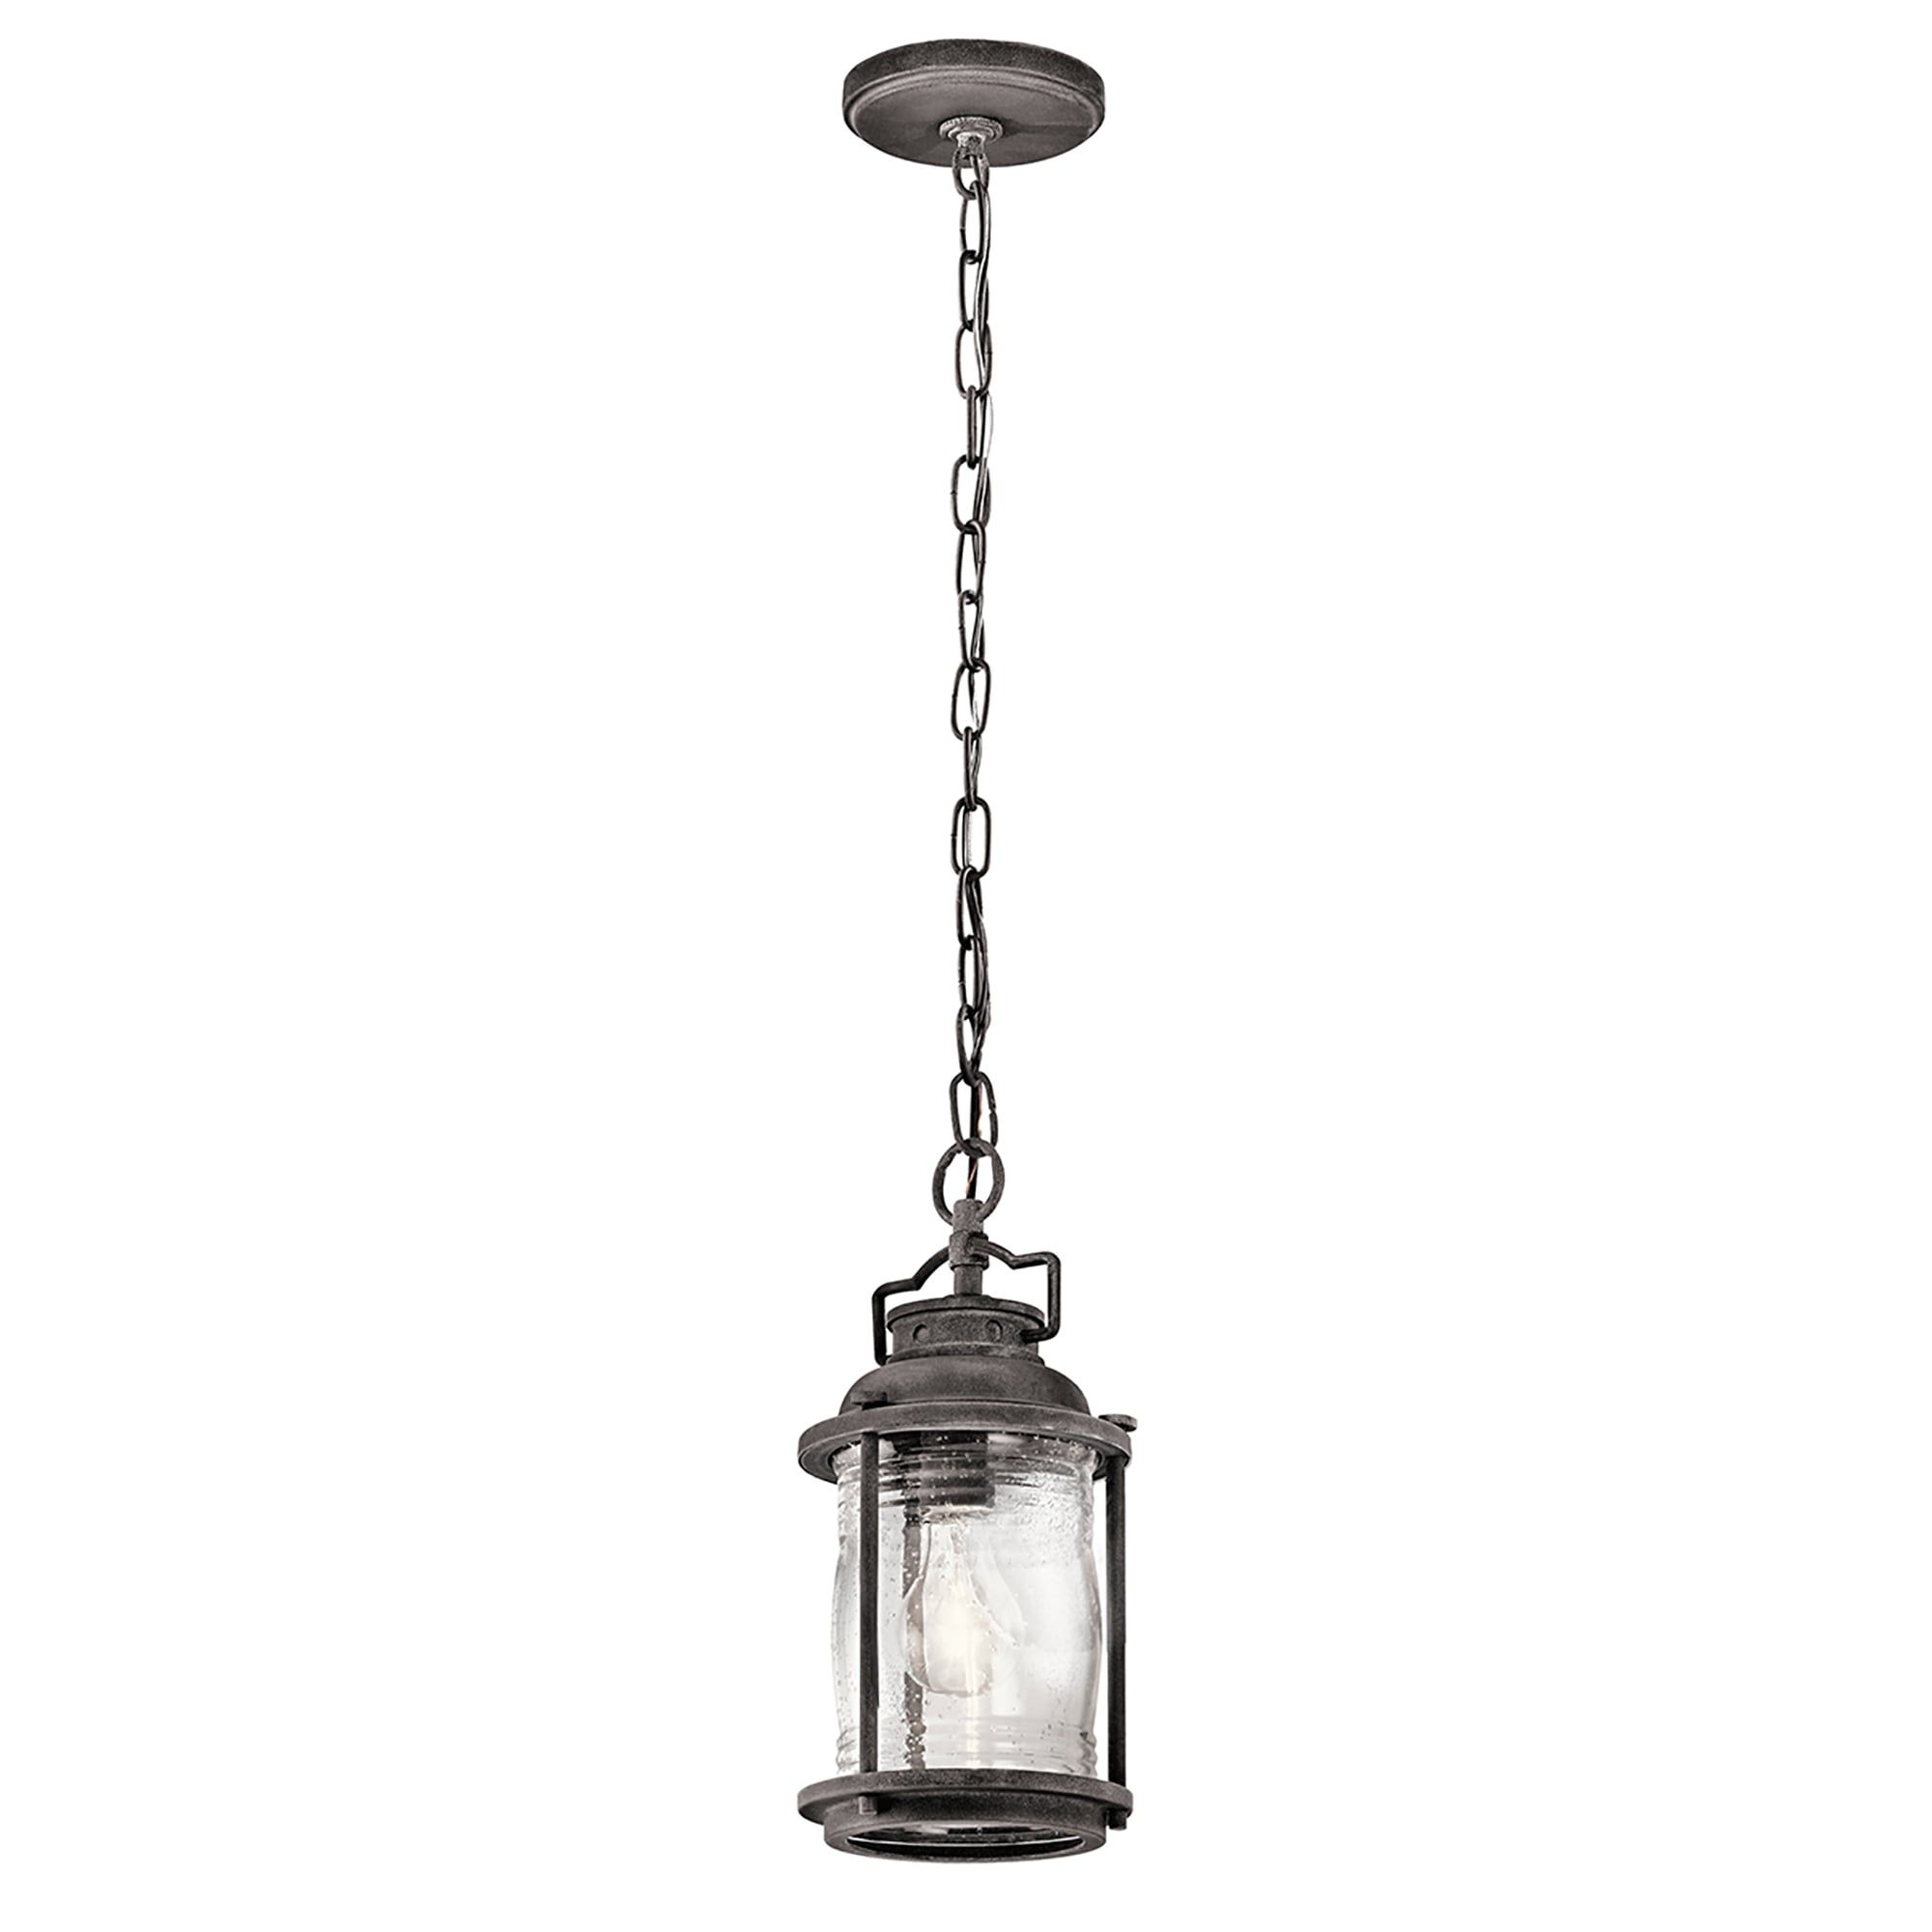 Elstead Lighting Kl/ashlandbay8/s Ashland Bay Single Light Ceiling Chain  Lantern In Weathered Zinc Finish With Clear Glass N11117 – Outdoor Lighting  From Castlegate Lights Uk With Most Recent Weathered Zinc Lantern Chandeliers (View 10 of 15)